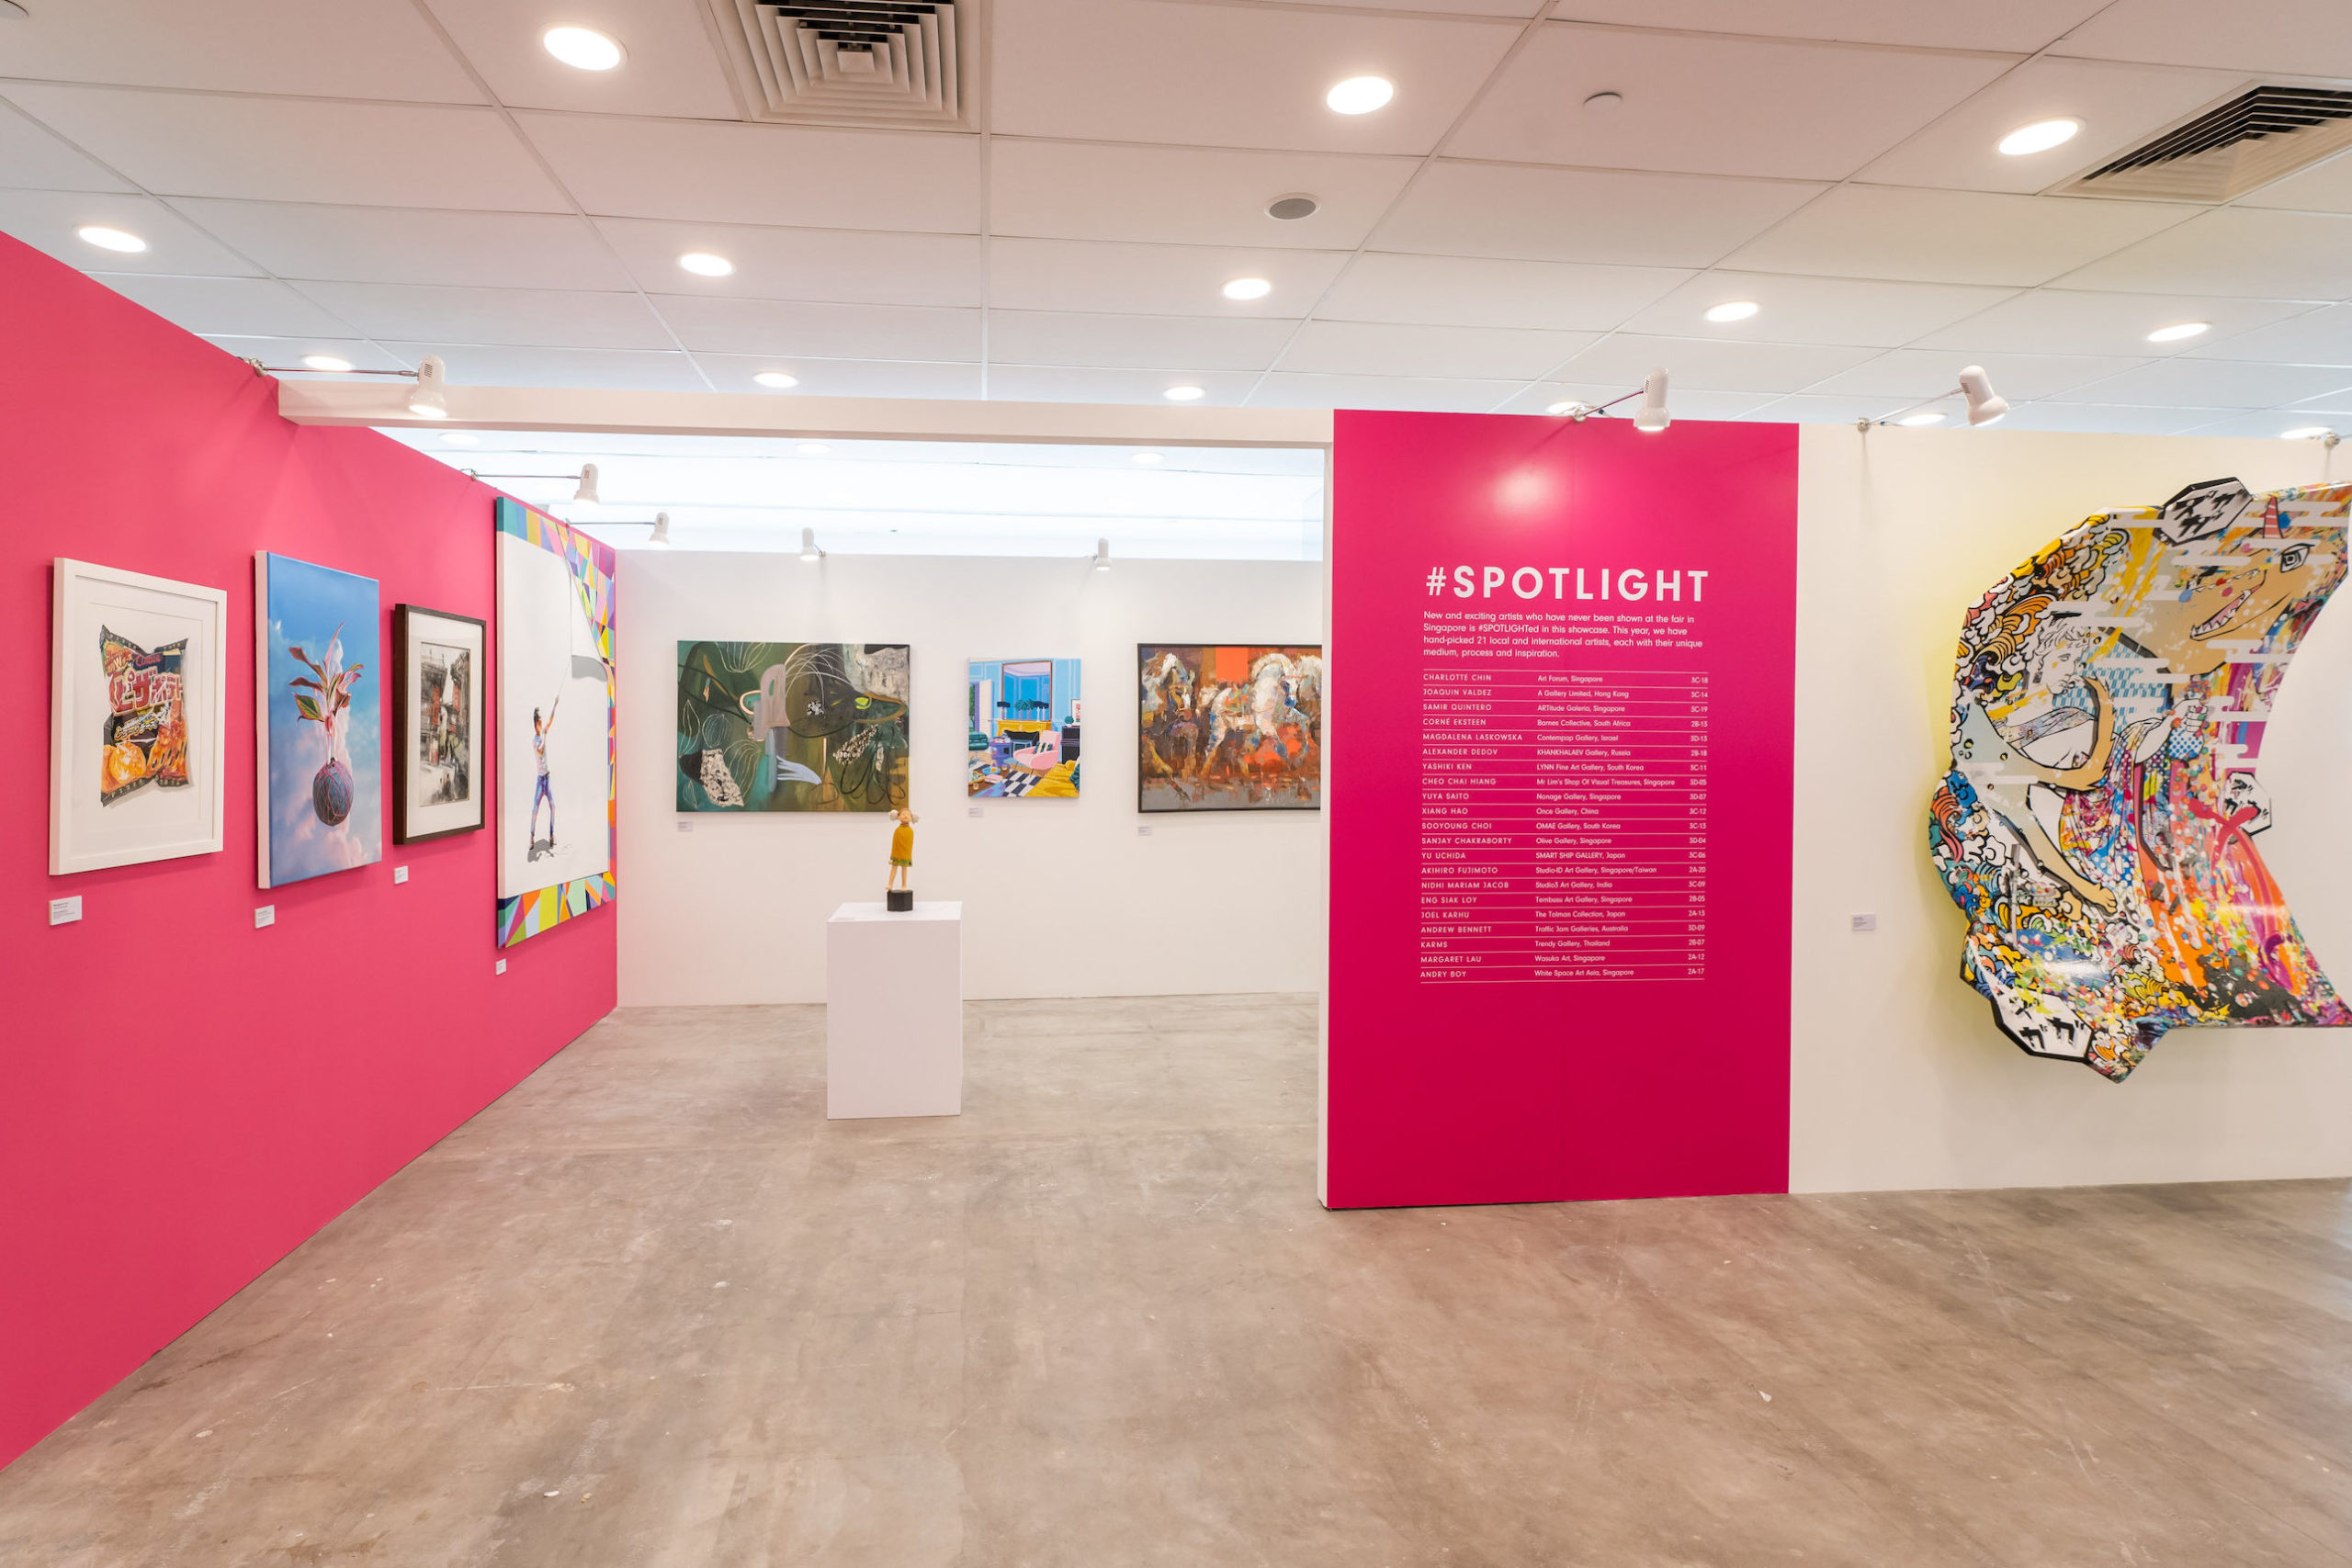 Photograph of the Spotlight section of the Affordable Art Fair 2022